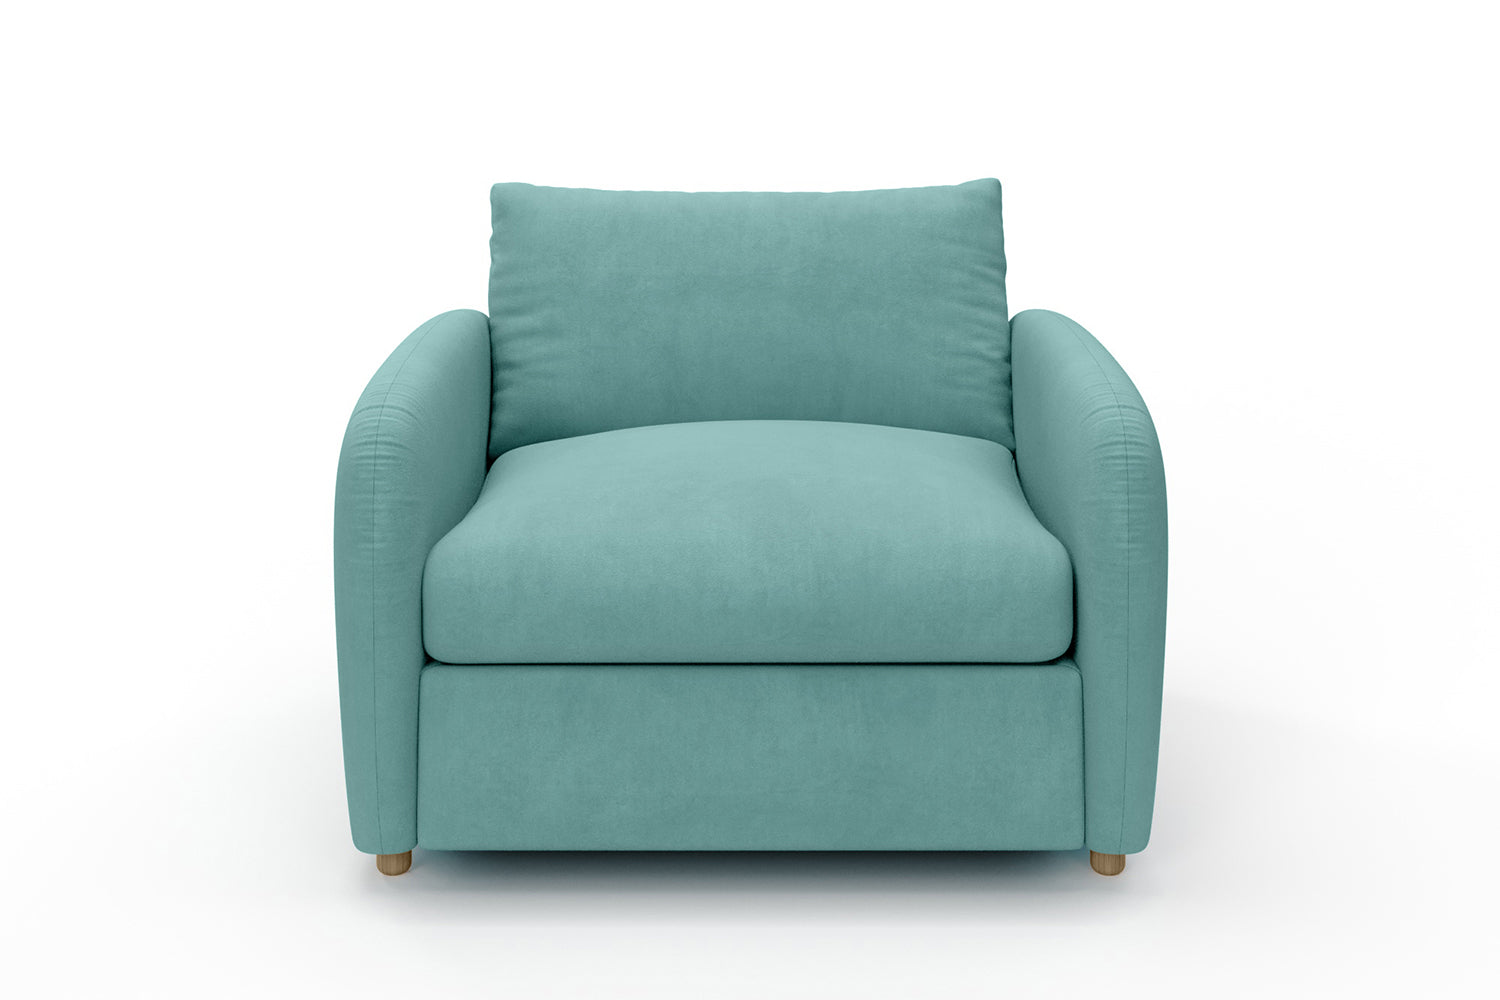 The Small Biggie - 1.5 Seater Snuggler - Soft Teal